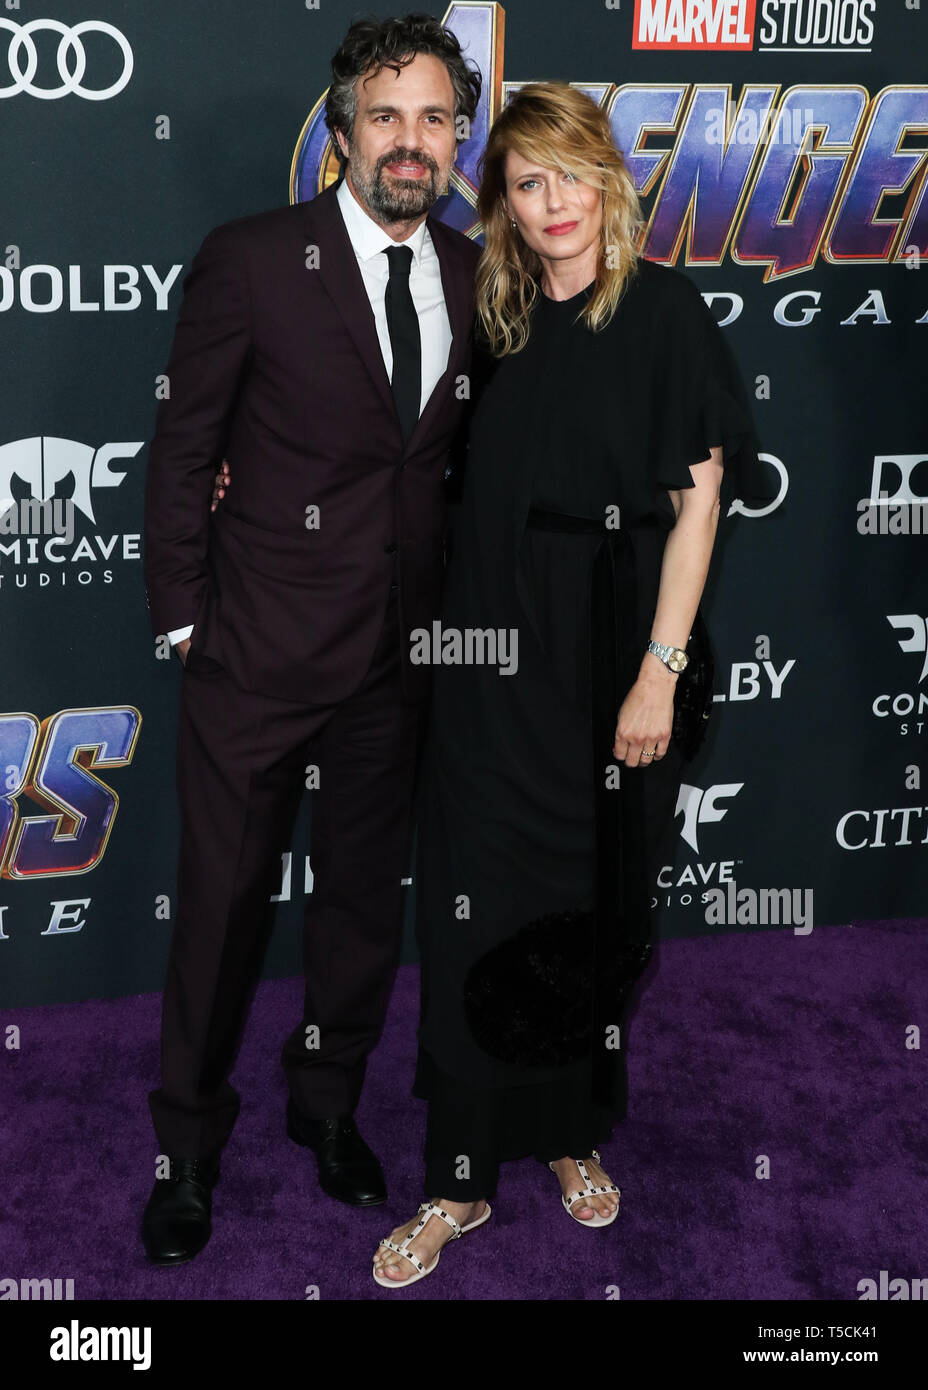 Los Angeles, United States. 22nd Apr, 2019.LOS ANGELES, CALIFORNIA, USA - APRIL 22: Actor Mark Ruffalo and Sunrise Coigney arrive at the World Premiere Of Walt Disney Studios Motion Pictures and Marvel Studios' 'Avengers: Endgame' held at the Los Angeles Convention Center on April 22, 2019 in Los Angeles, California, United States. (Photo by Xavier Collin/Image Press Agency) Credit: Image Press Agency/Alamy Live News Stock Photo